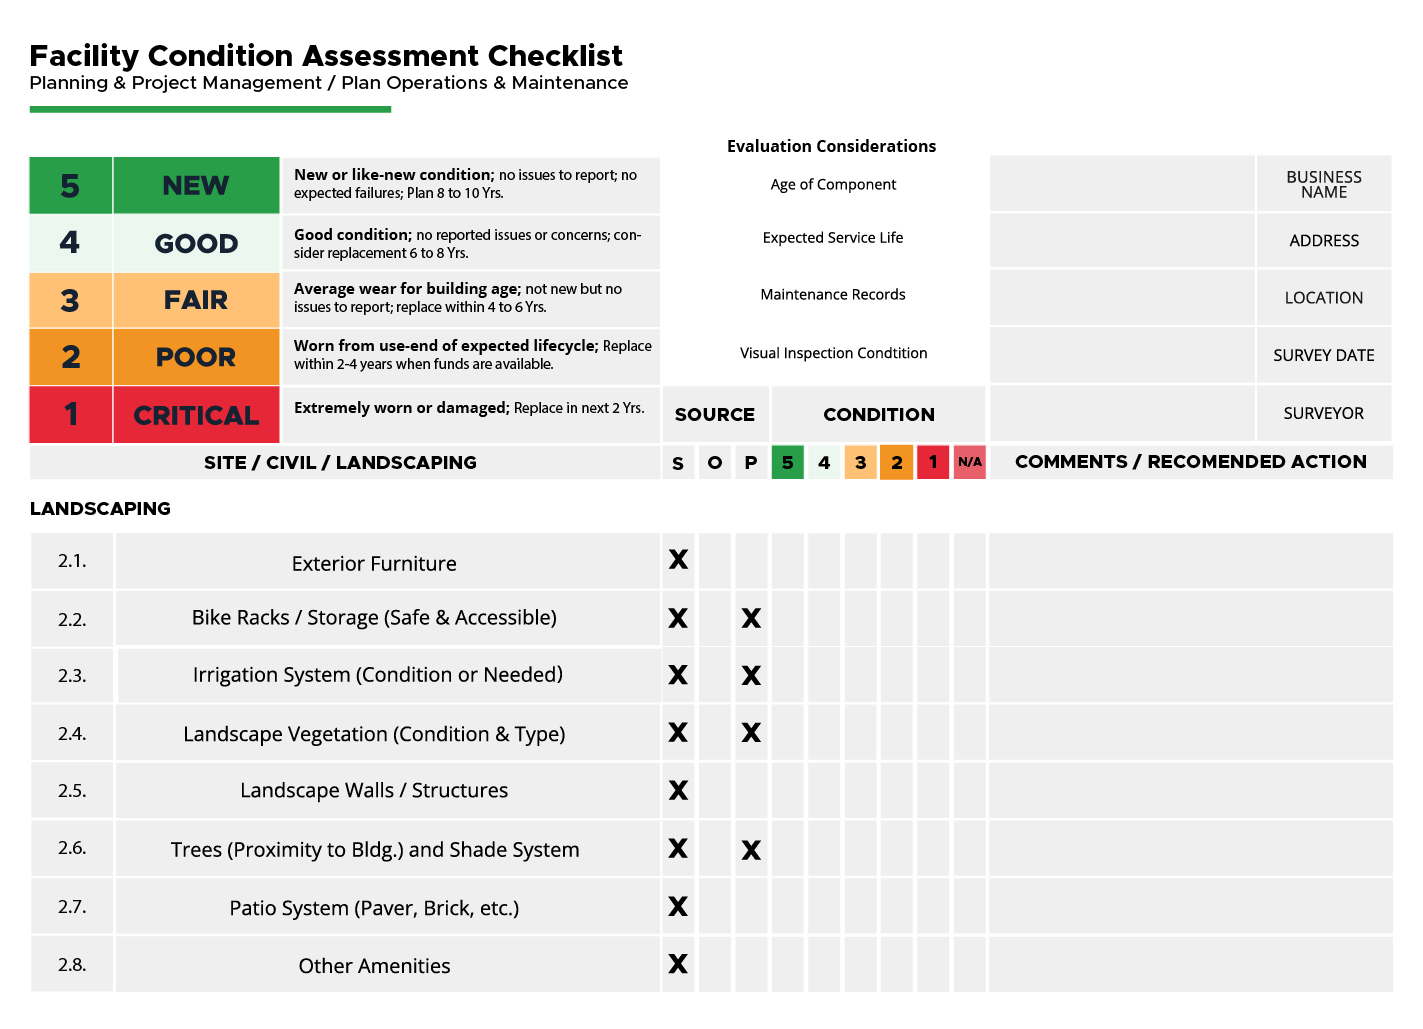 Facility Condition Assessment or FCA Checklist